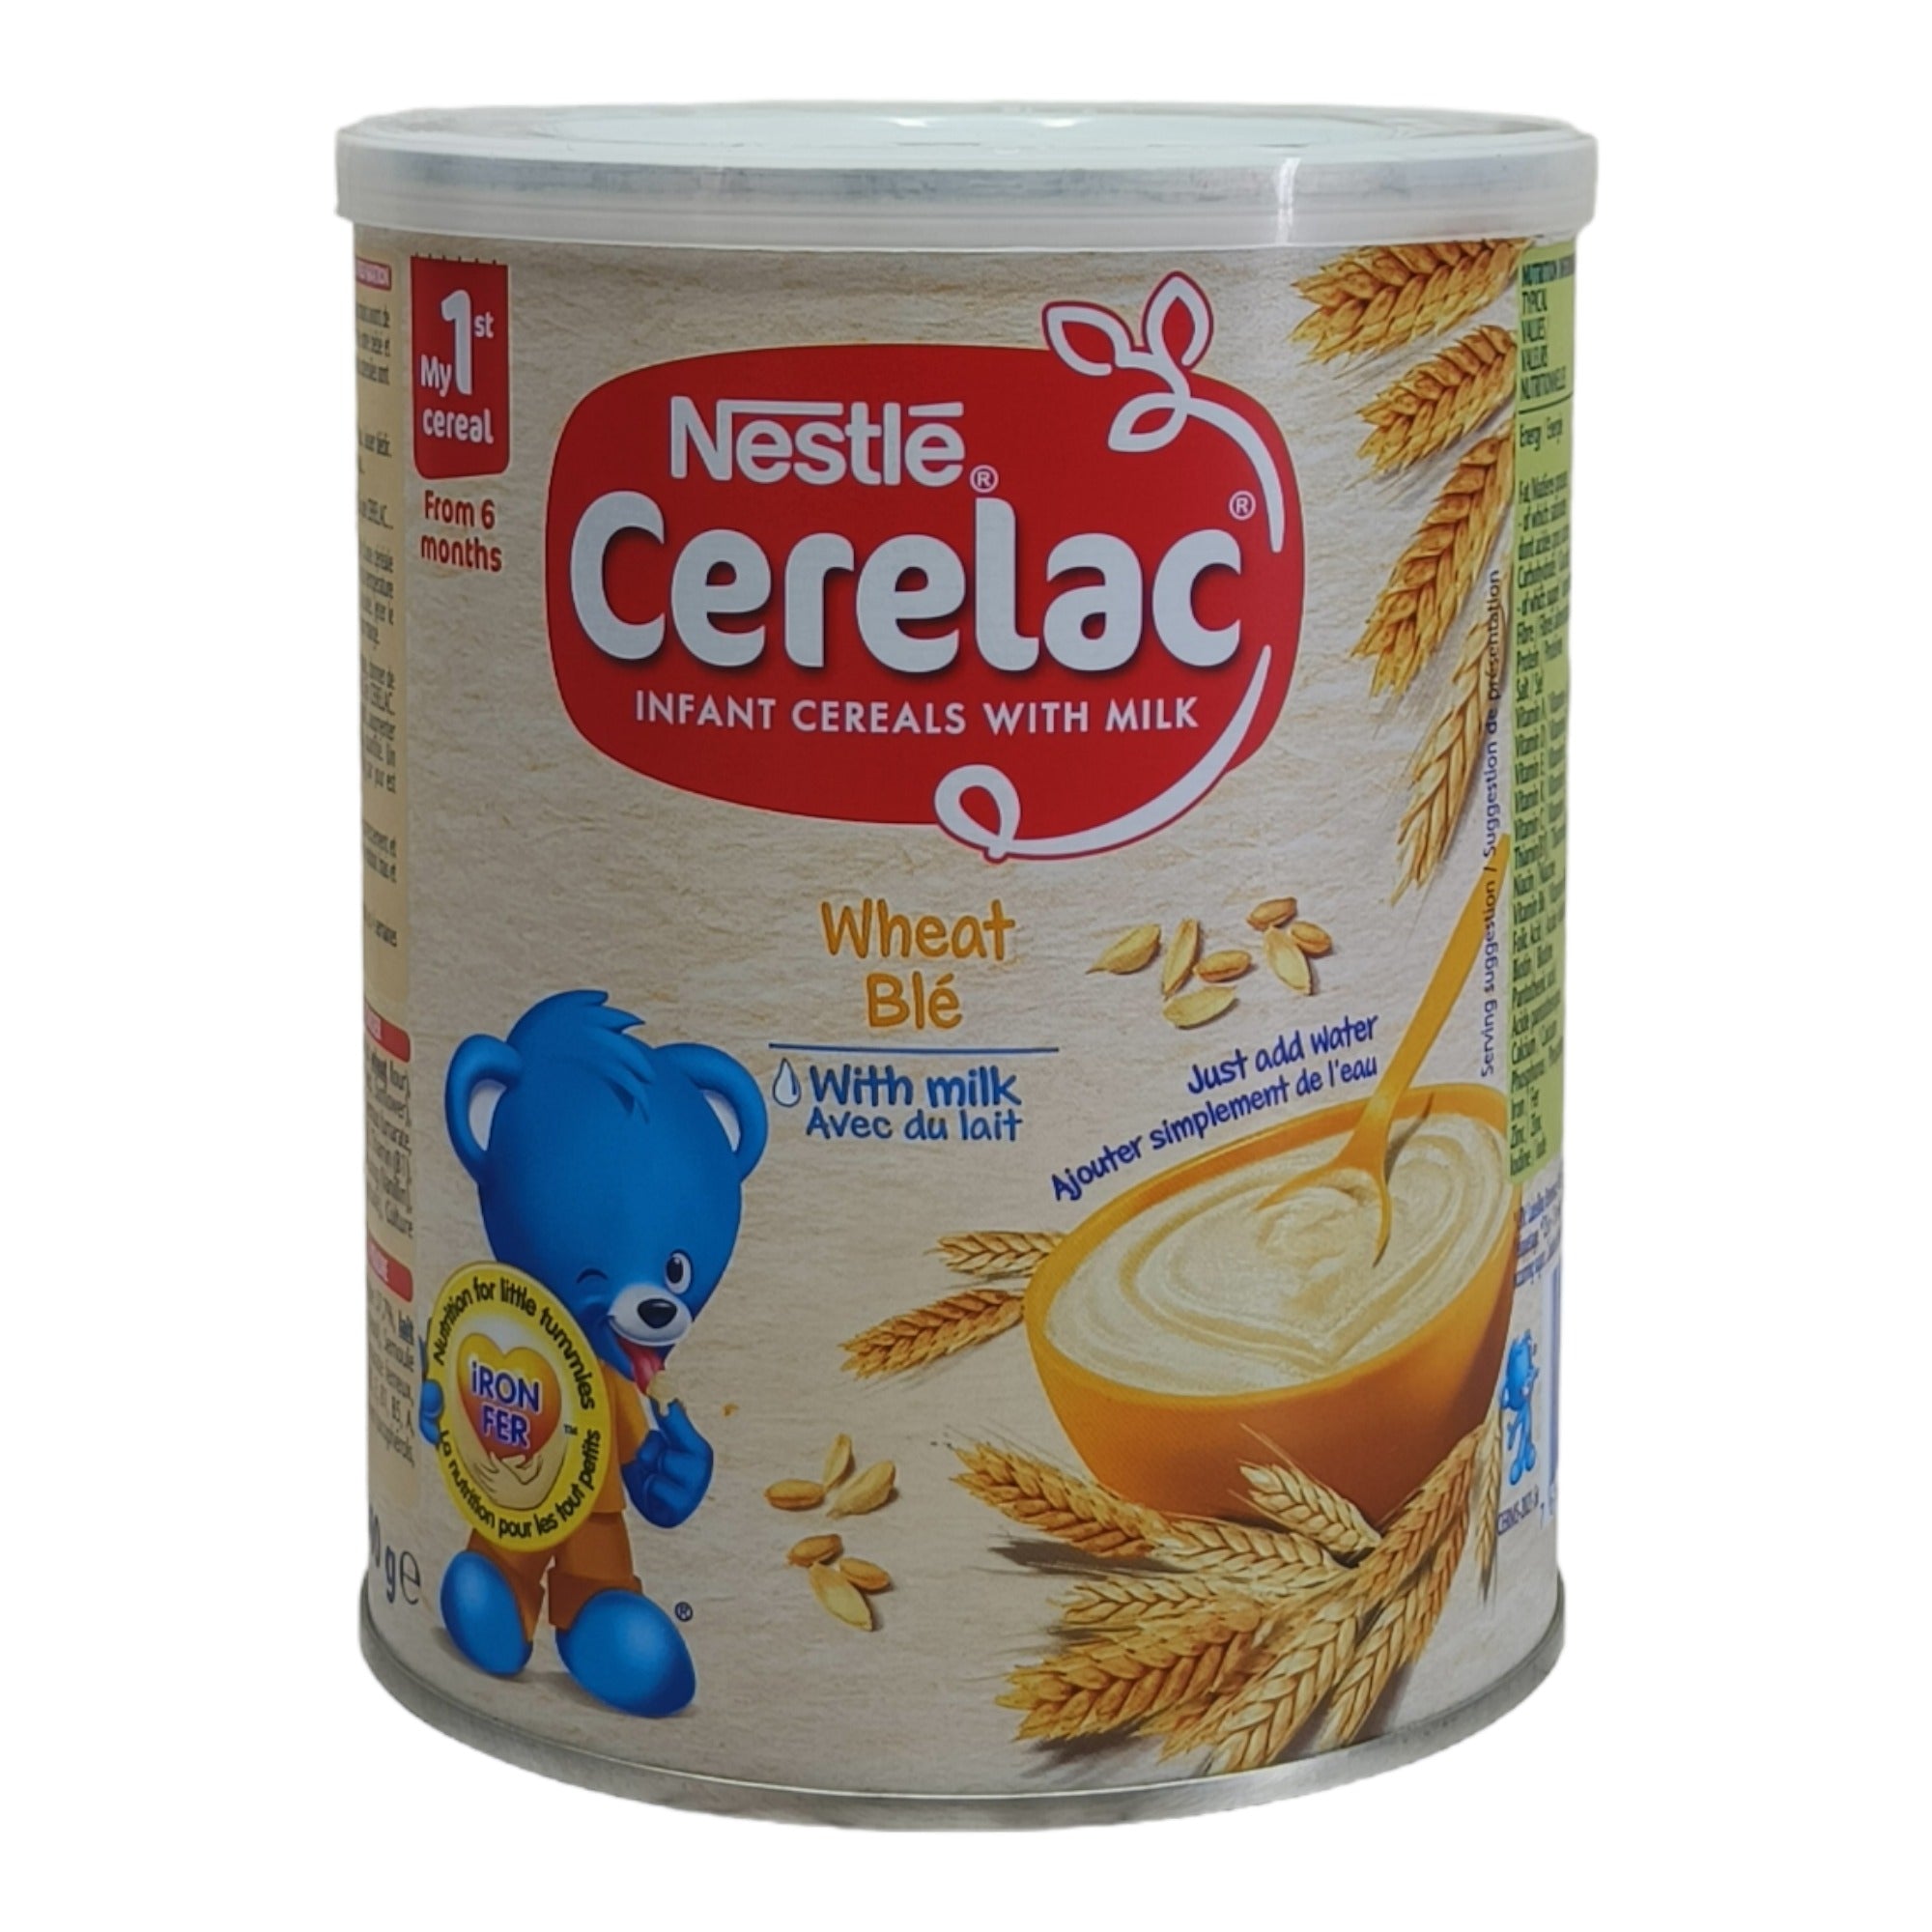 Nestle Cerelac Wheat (Ble) with Milk - 400g (Imported)